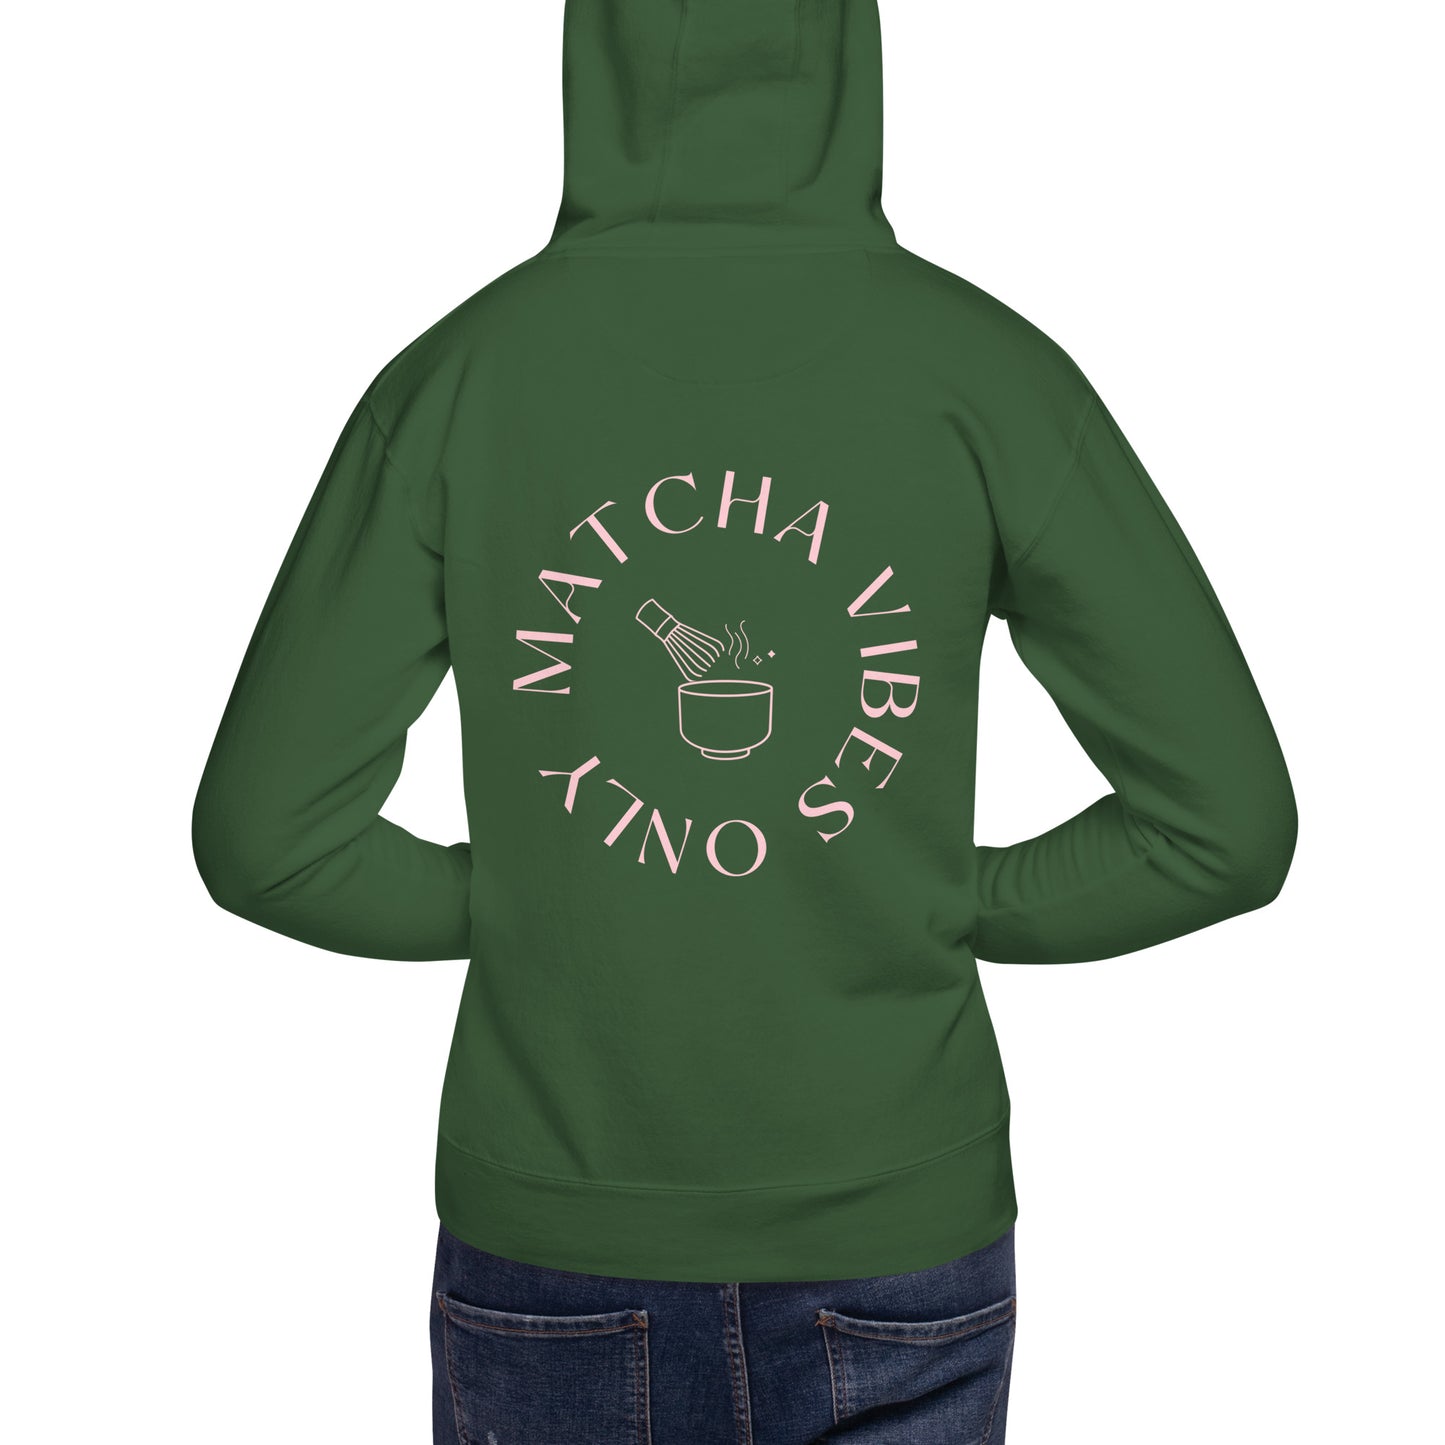 Matcha Vibes Only Unisex Hoodie